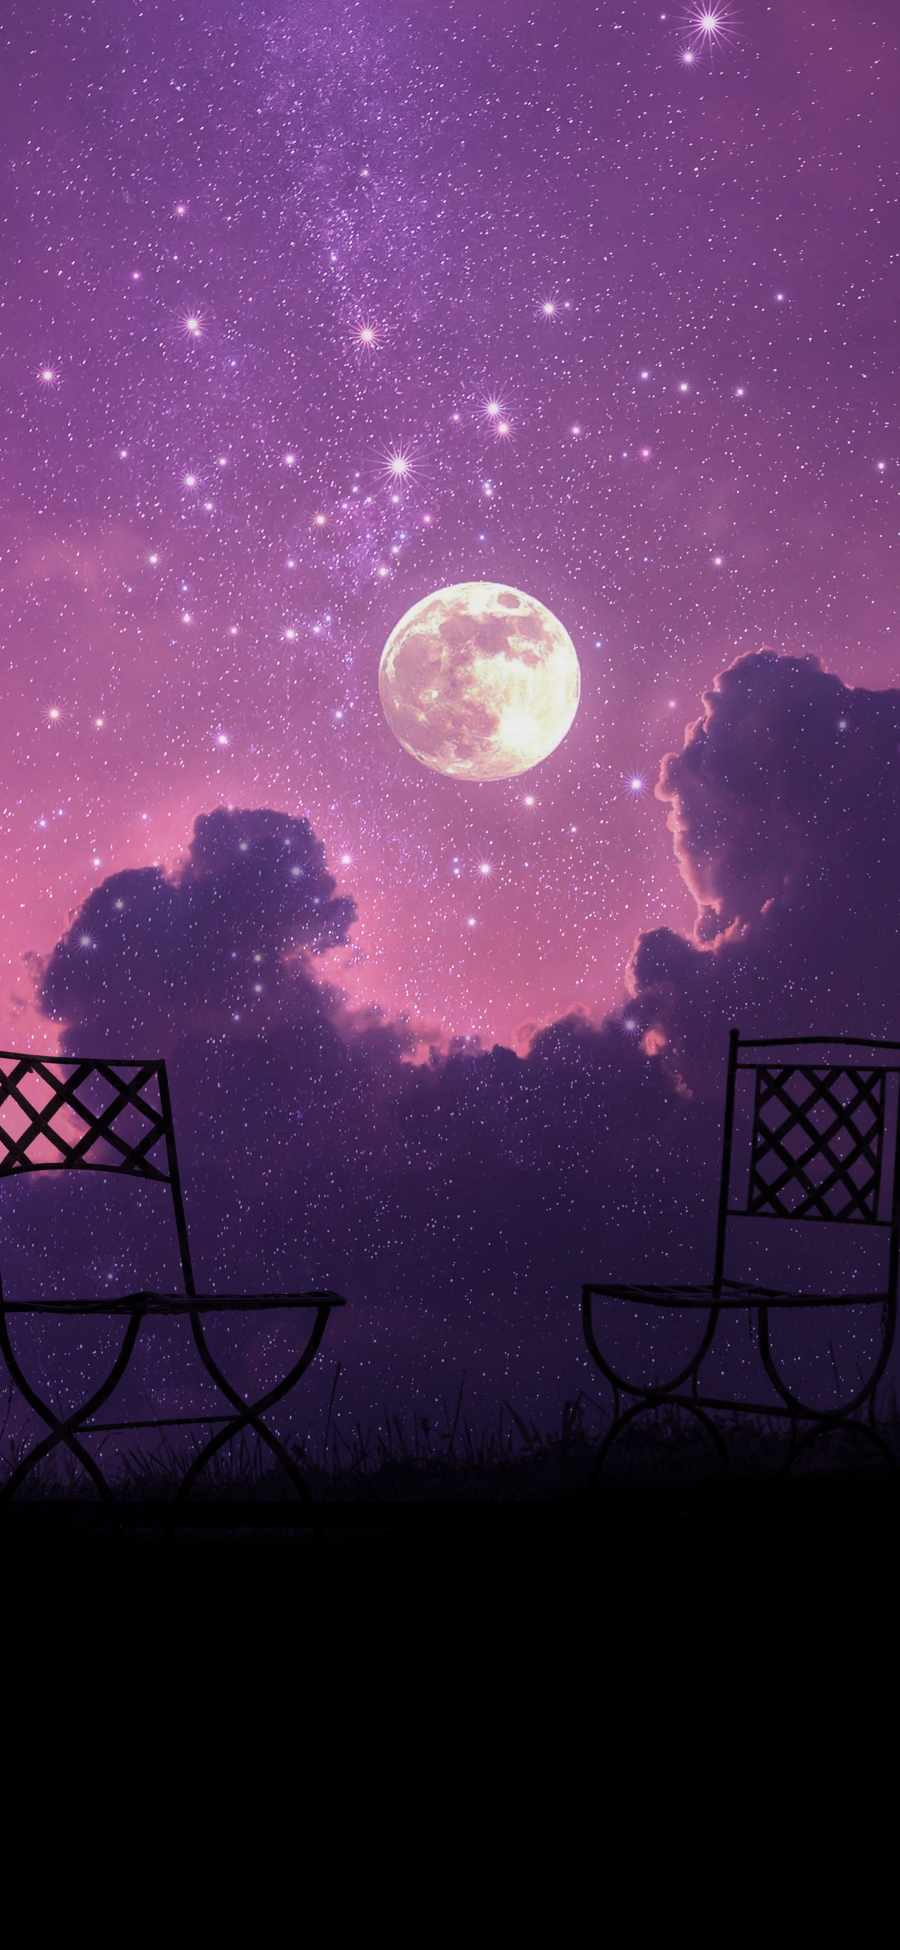 Magical Night IPhone Wallpaper HD  IPhone Wallpapers